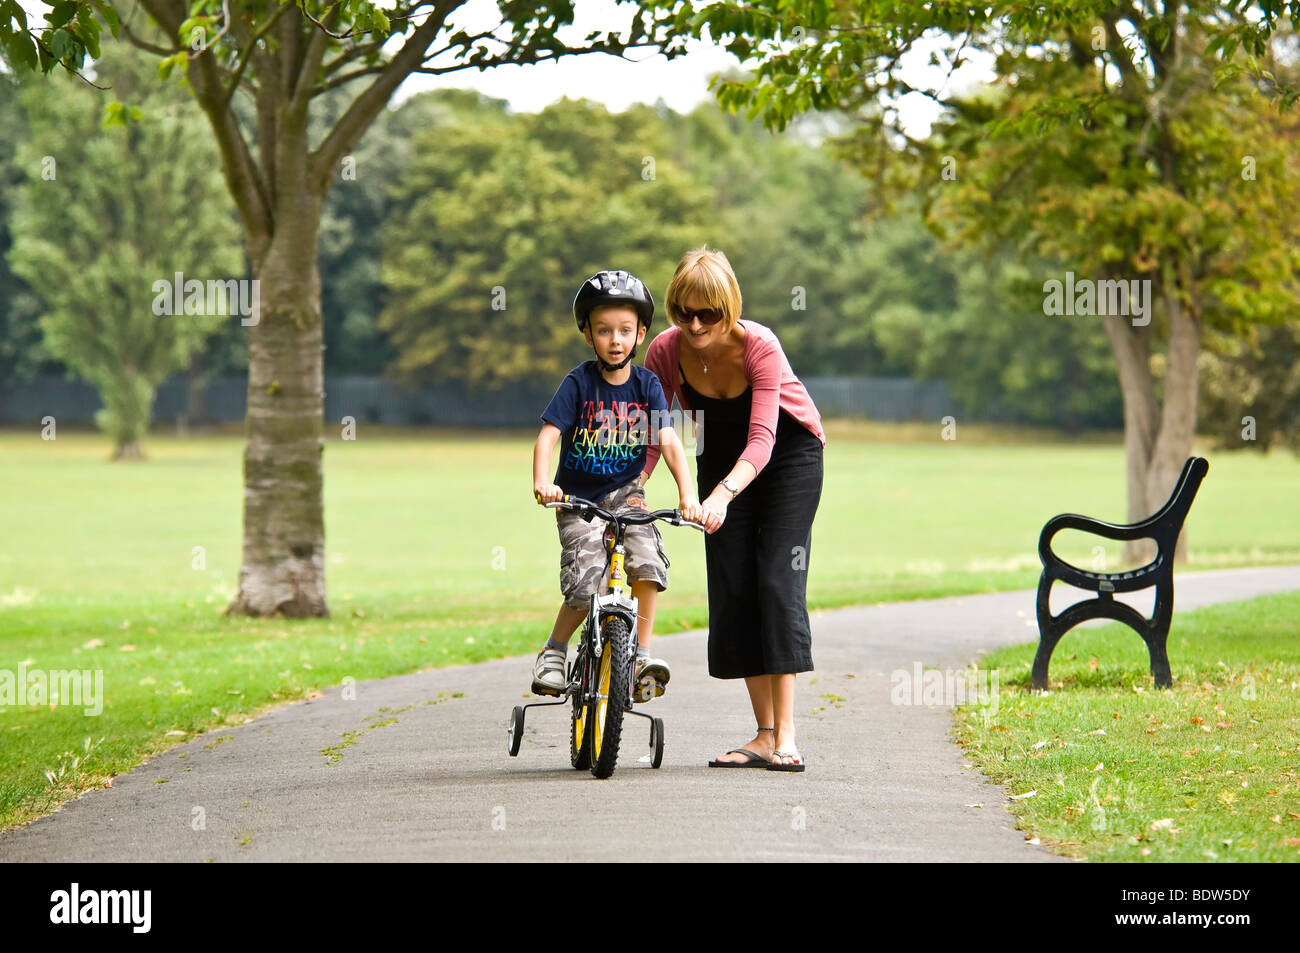 Horizontal close up portrait of a young mum helping her son learn to ride a bike with stabilisers in the park Stock Photo